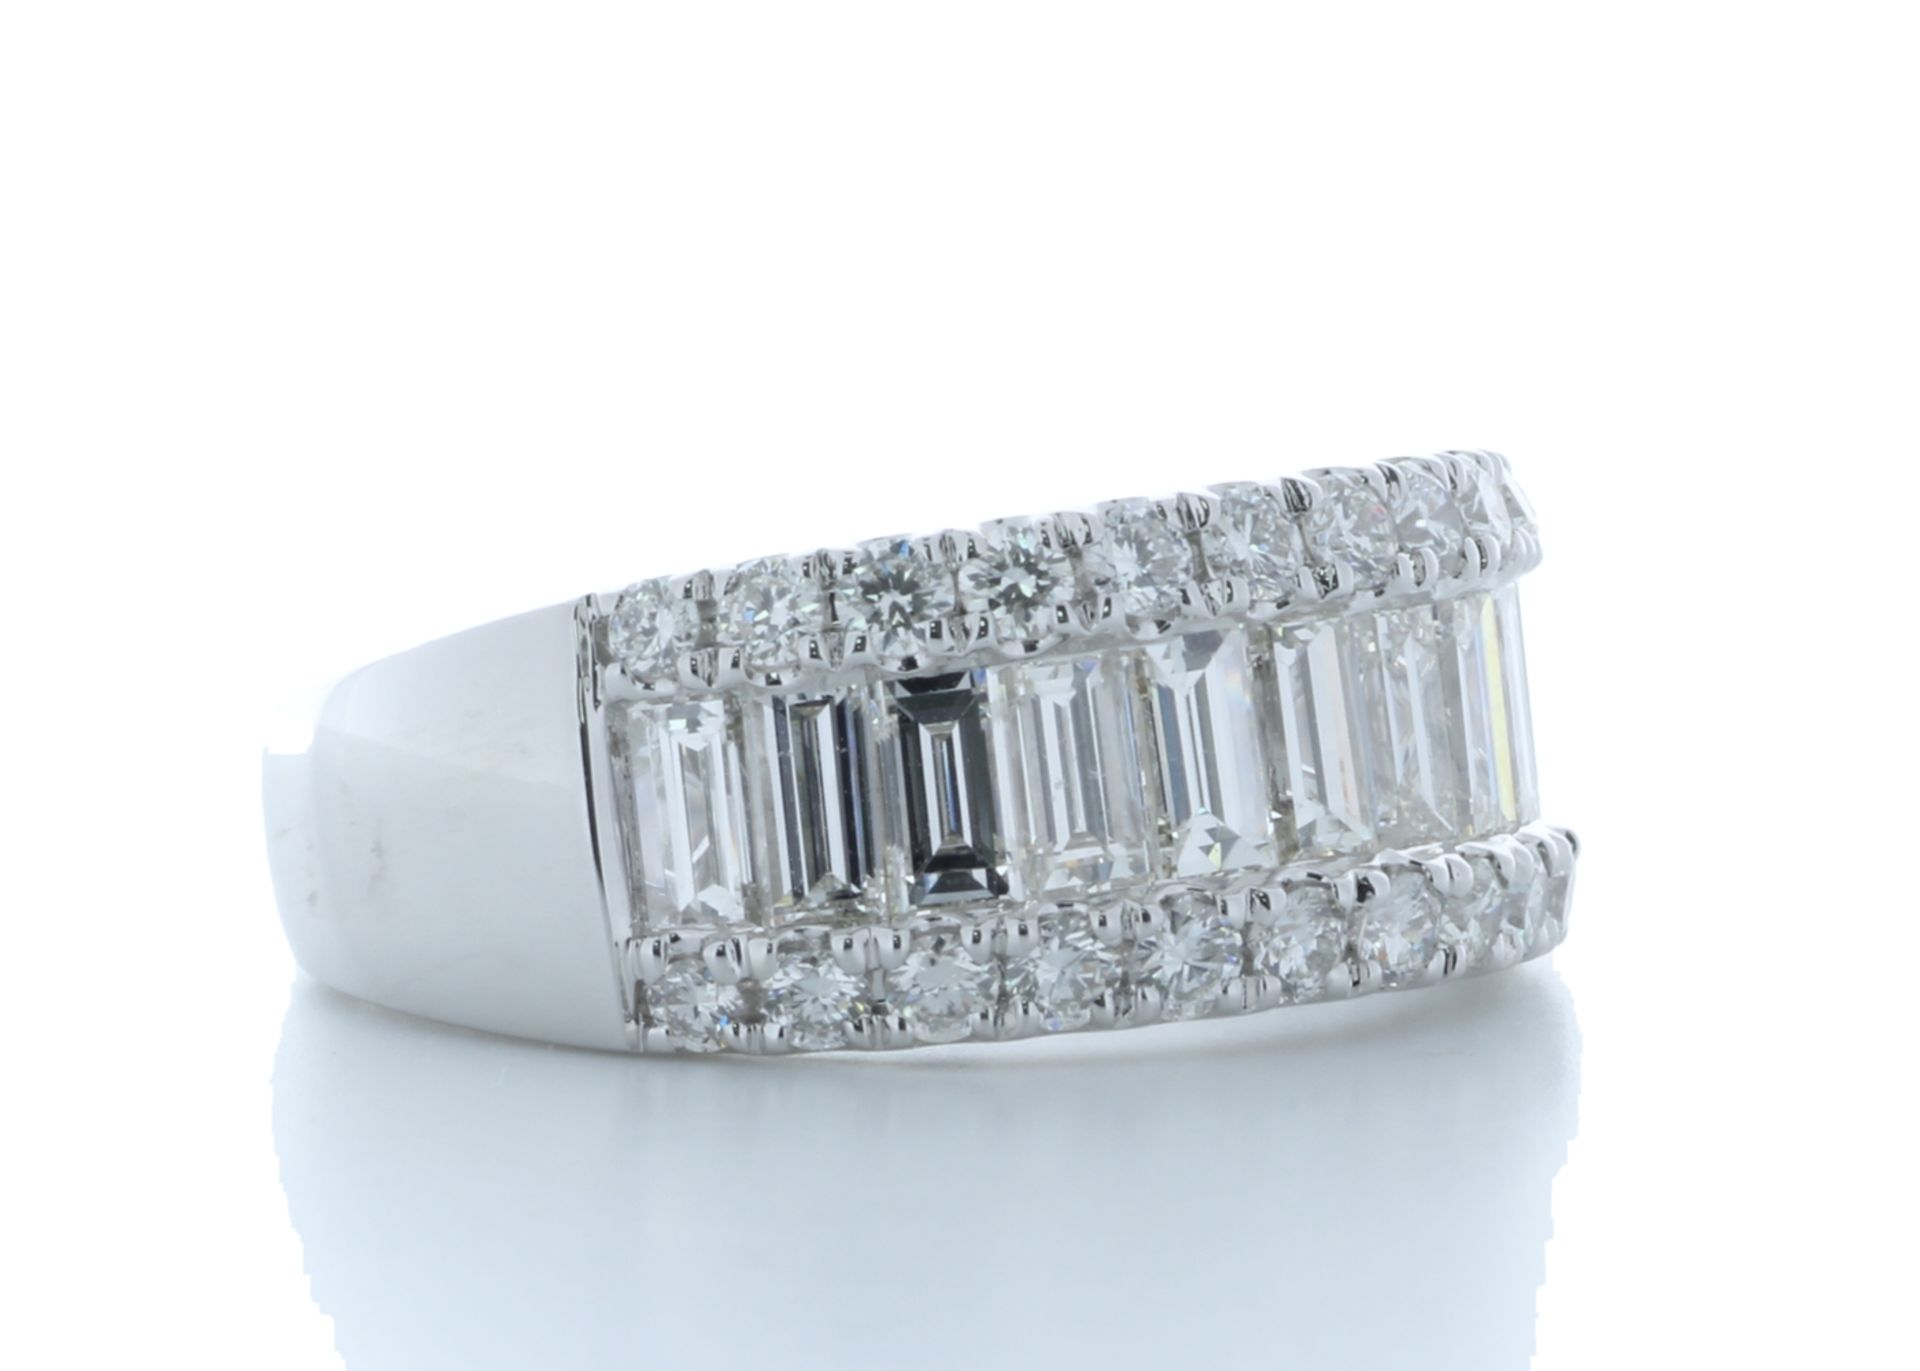 18ct White Gold Channel Set Semi Eternity Diamond Ring 2.34 Carats - Valued by AGI £17,600.00 - 18ct - Image 4 of 4